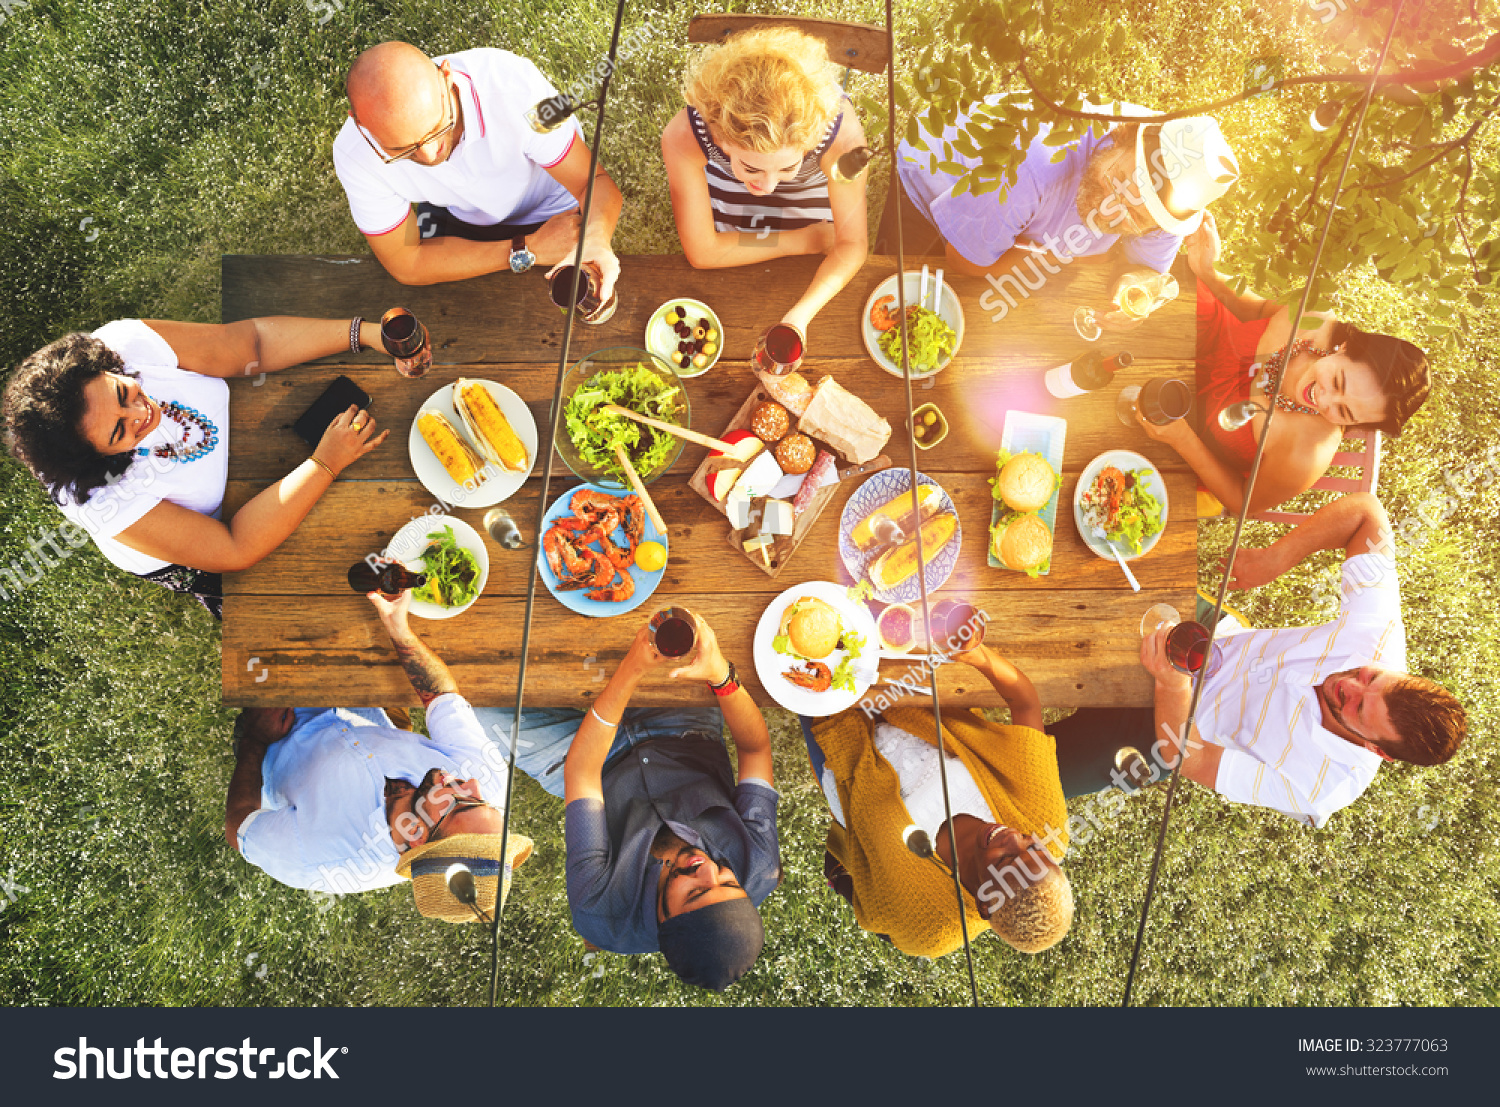 Friends Friendship Outdoor Dining People Concept #323777063